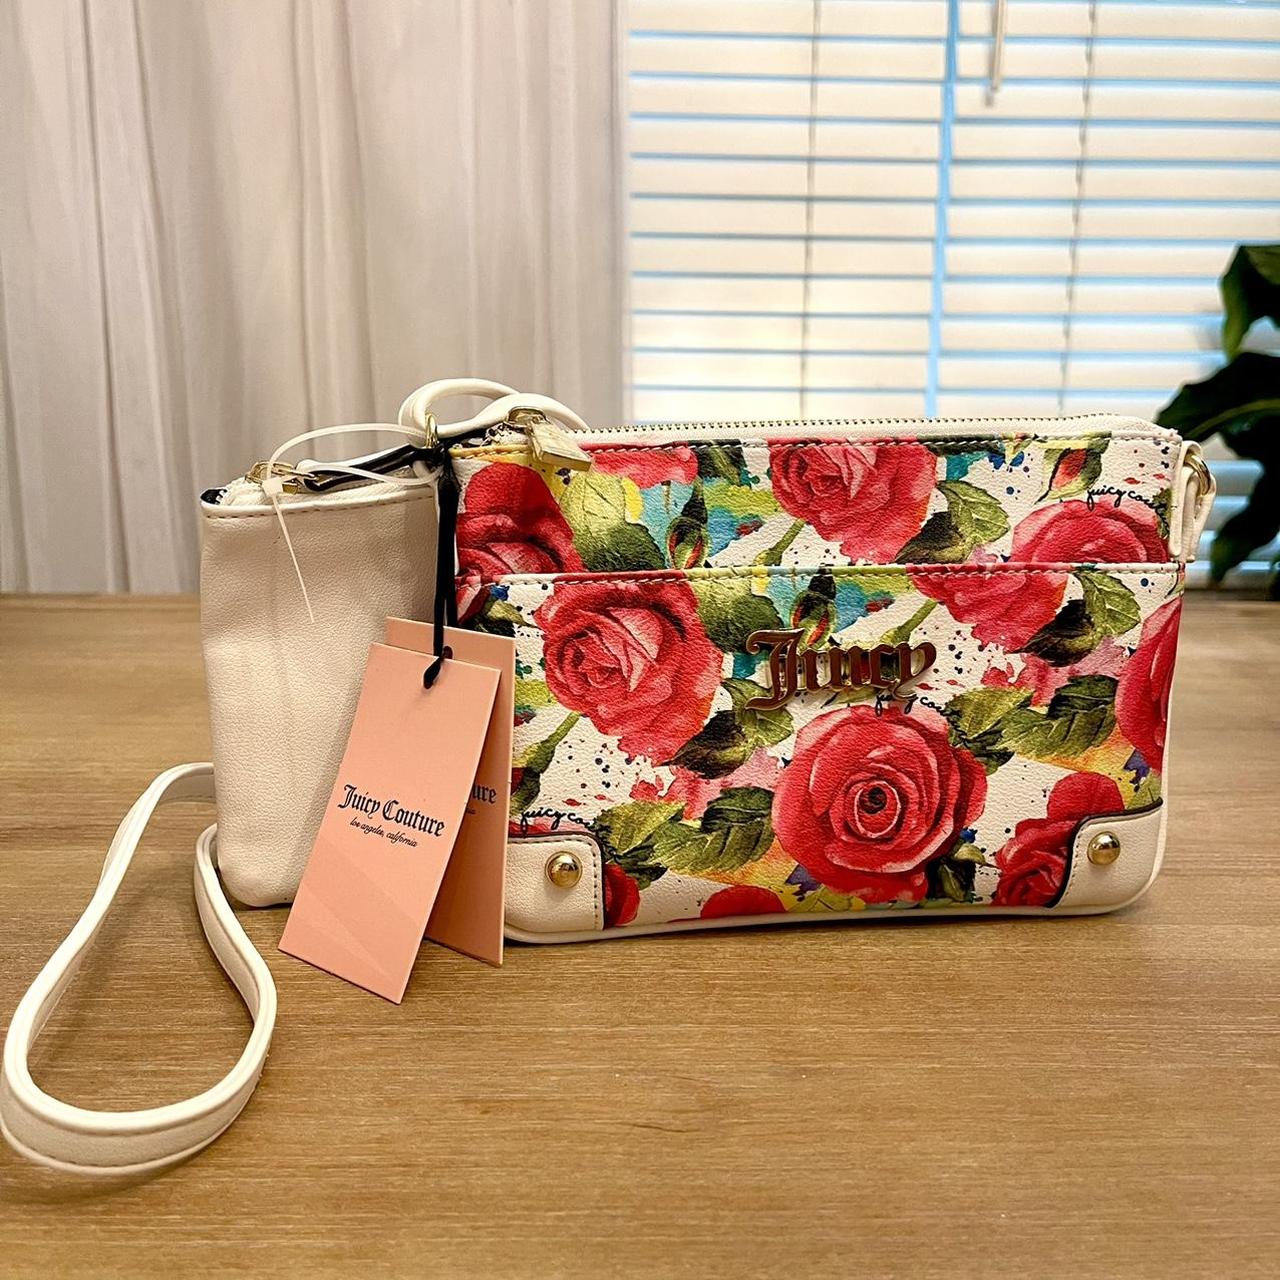 This Juicy Couture crossbody purse is perfect for - Depop